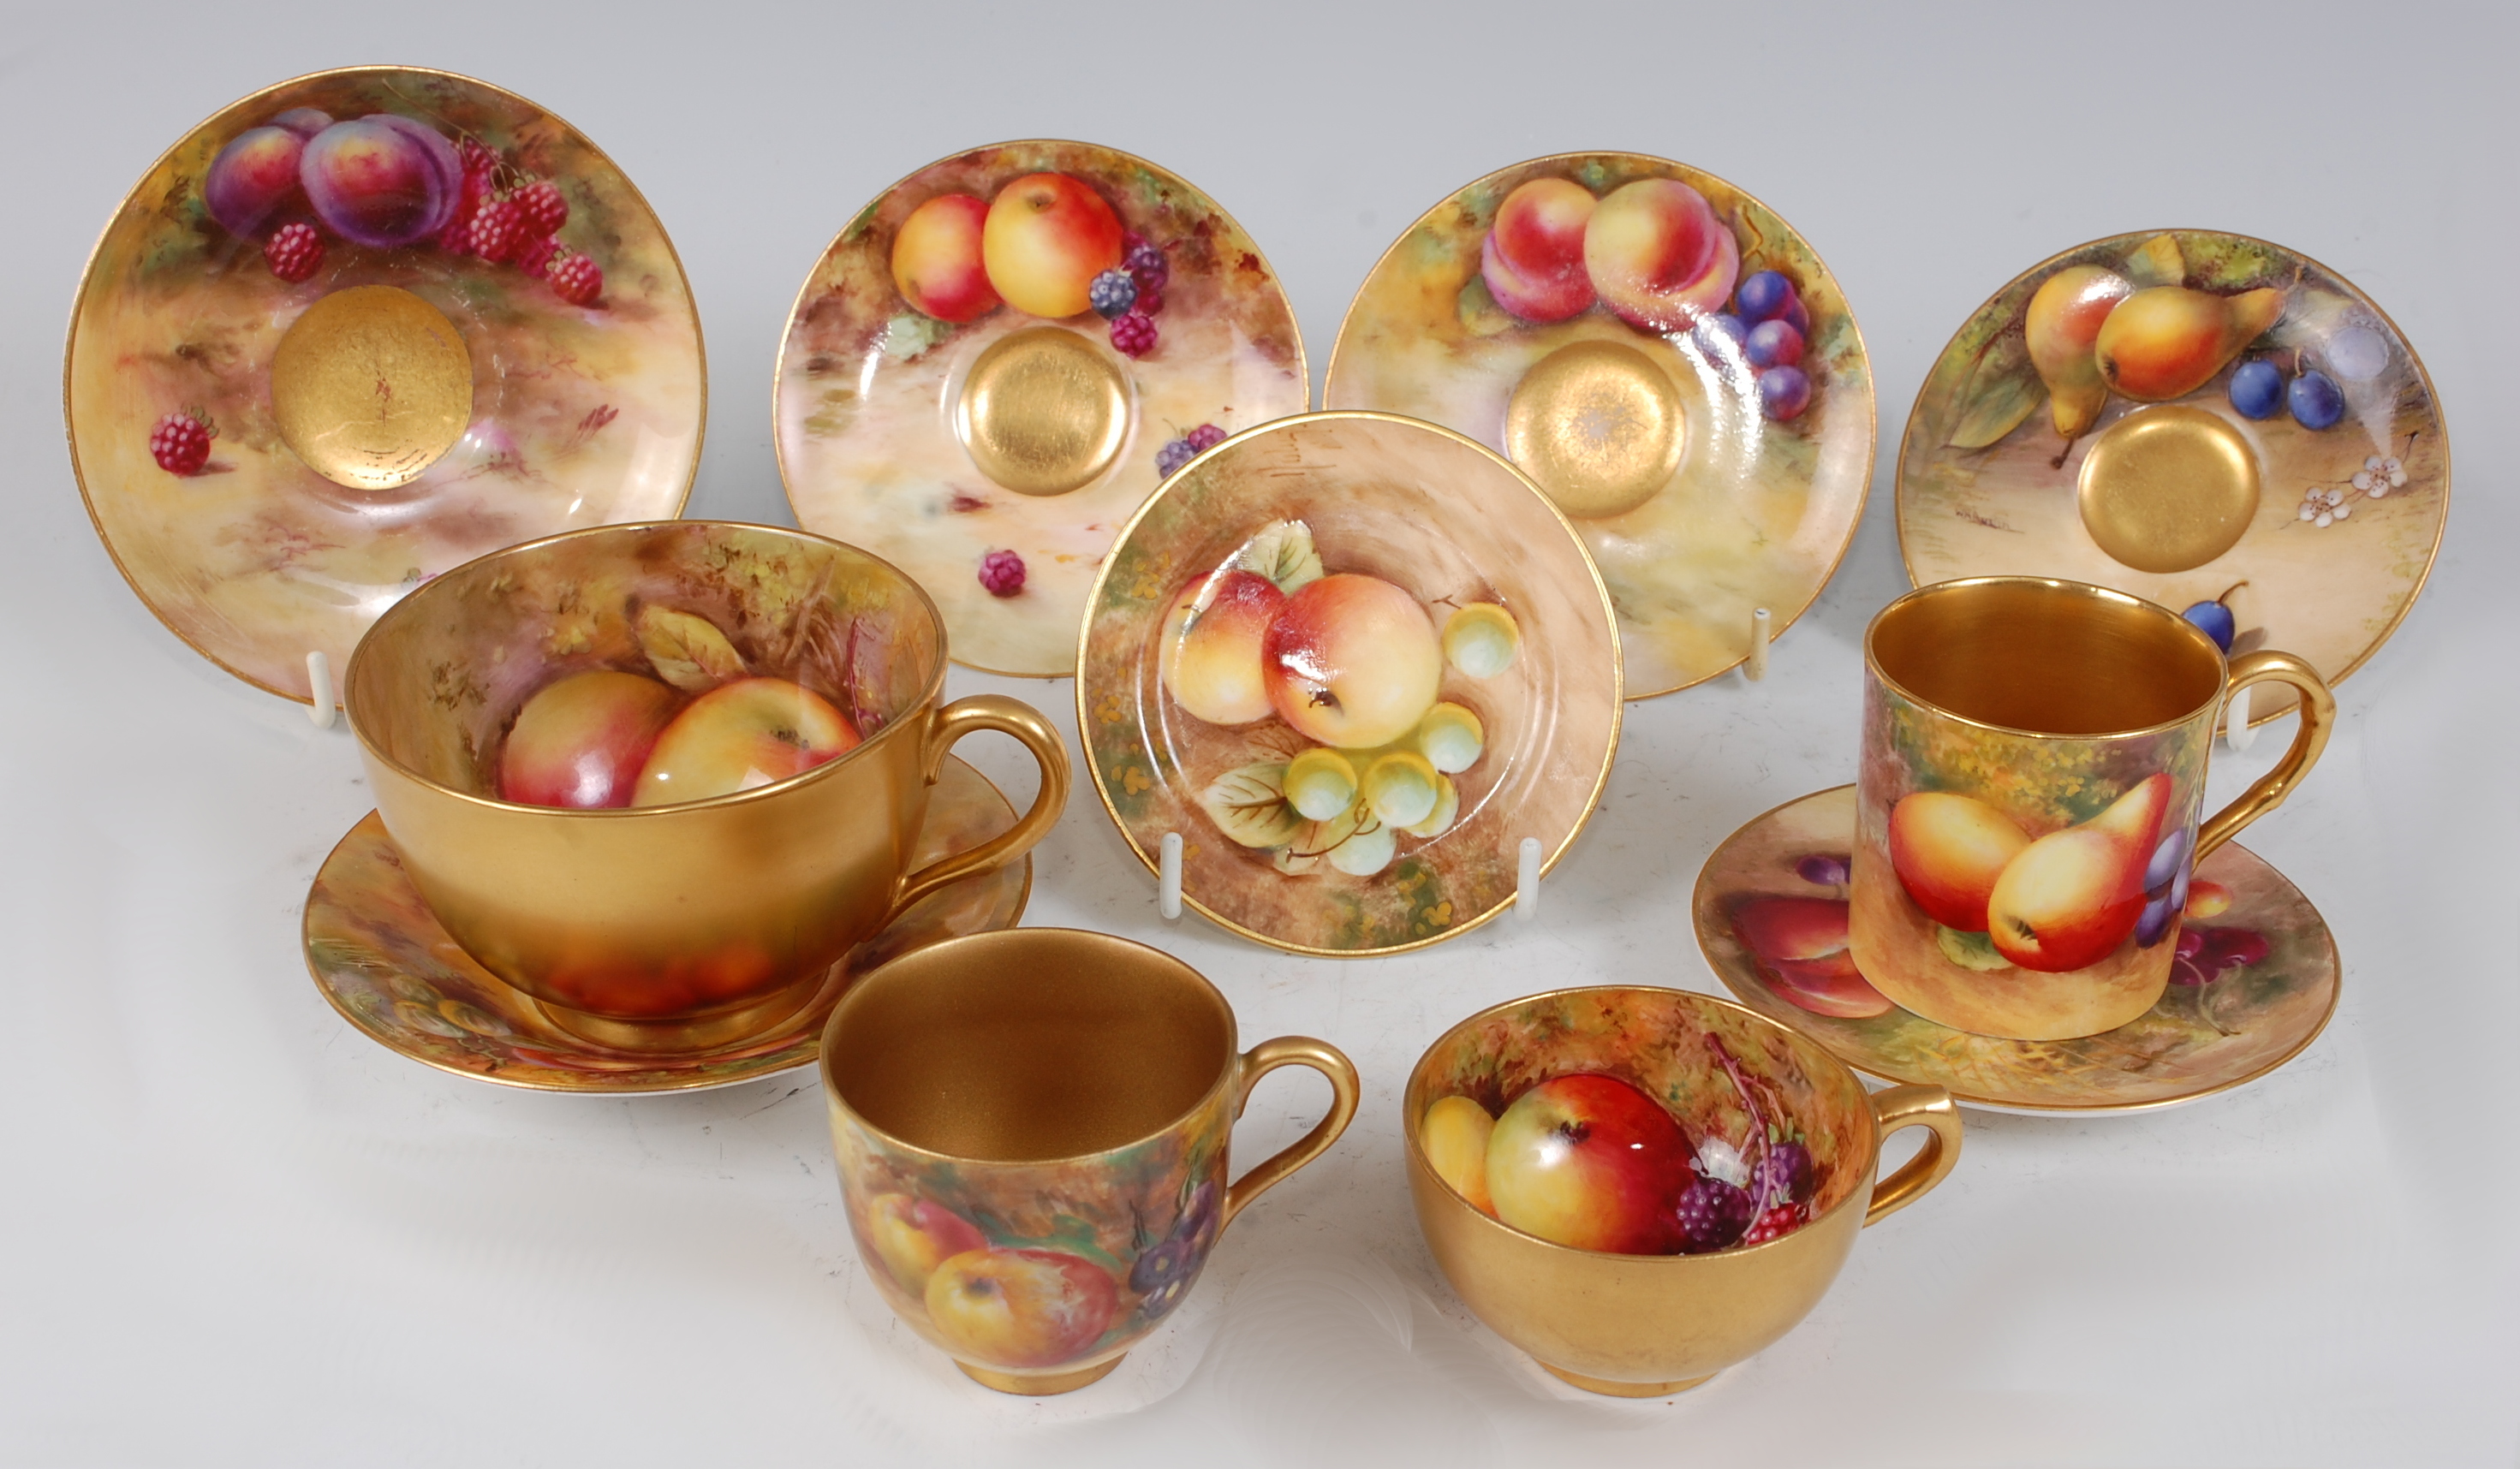 *A Royal Worcester porcelain teacup and saucer, the teacup hand-painted with apples and